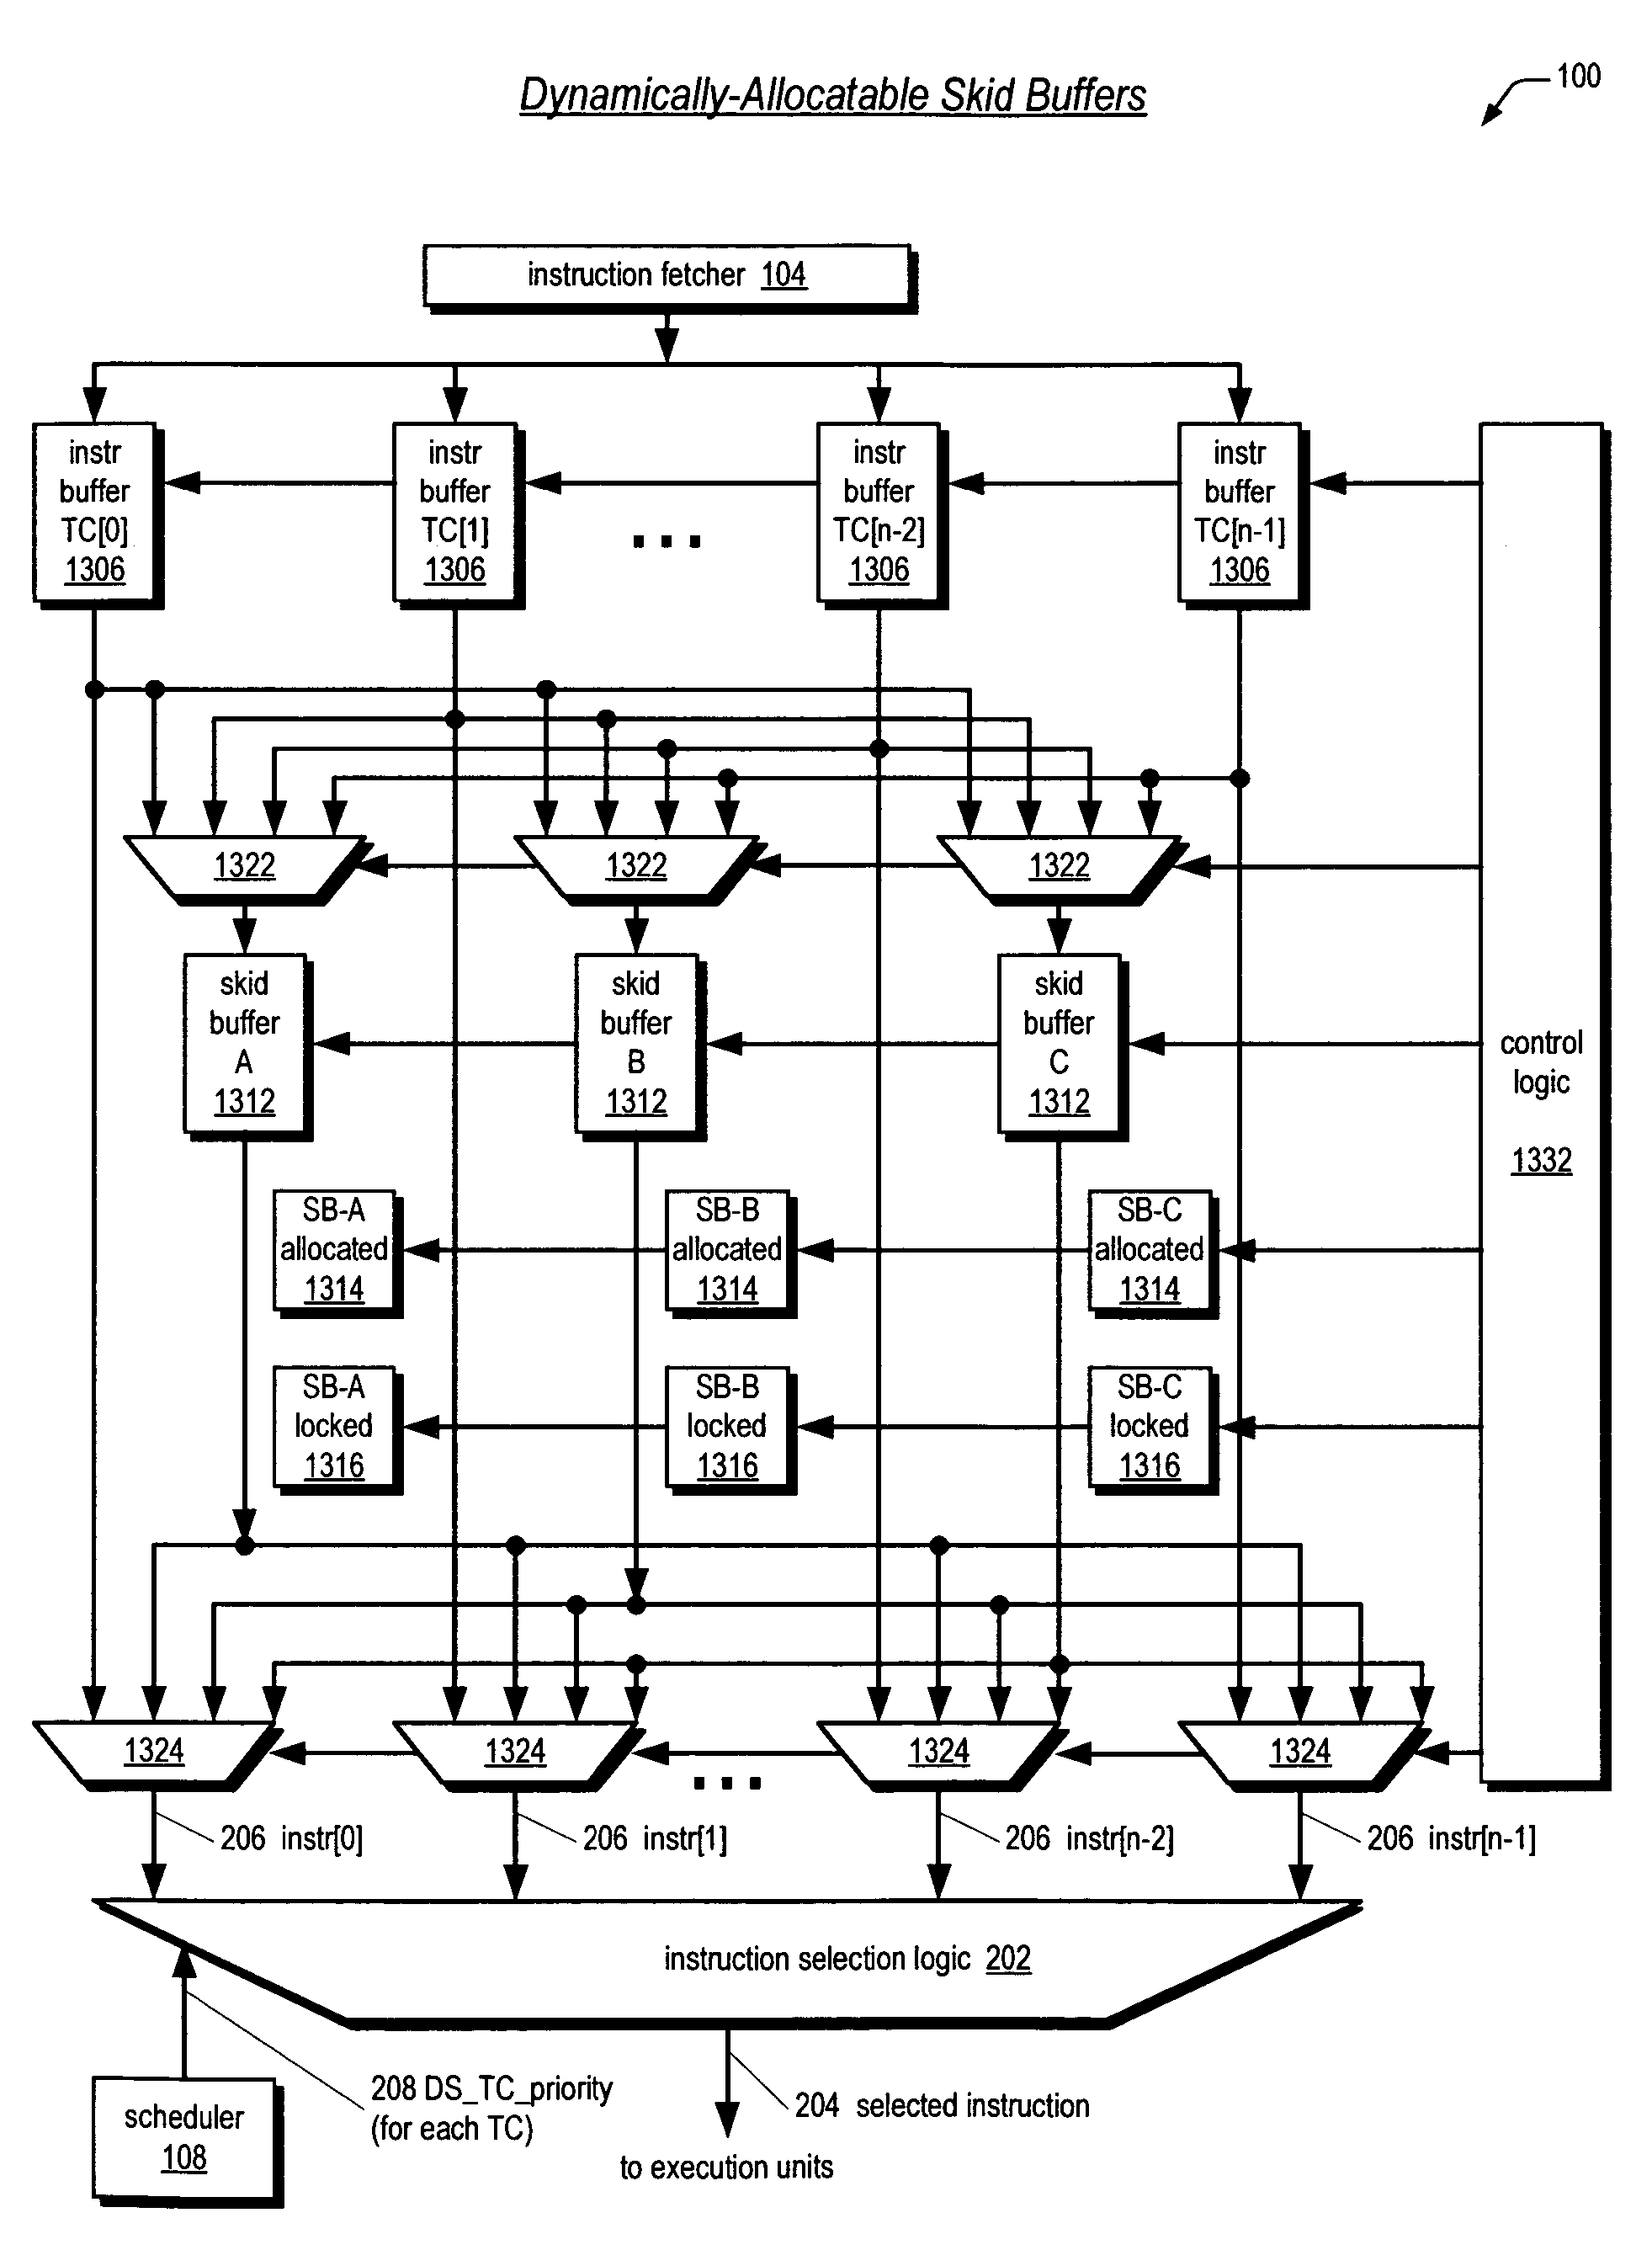 Instruction/skid buffers in a multithreading microprocessor that store dispatched instructions to avoid re-fetching flushed instructions